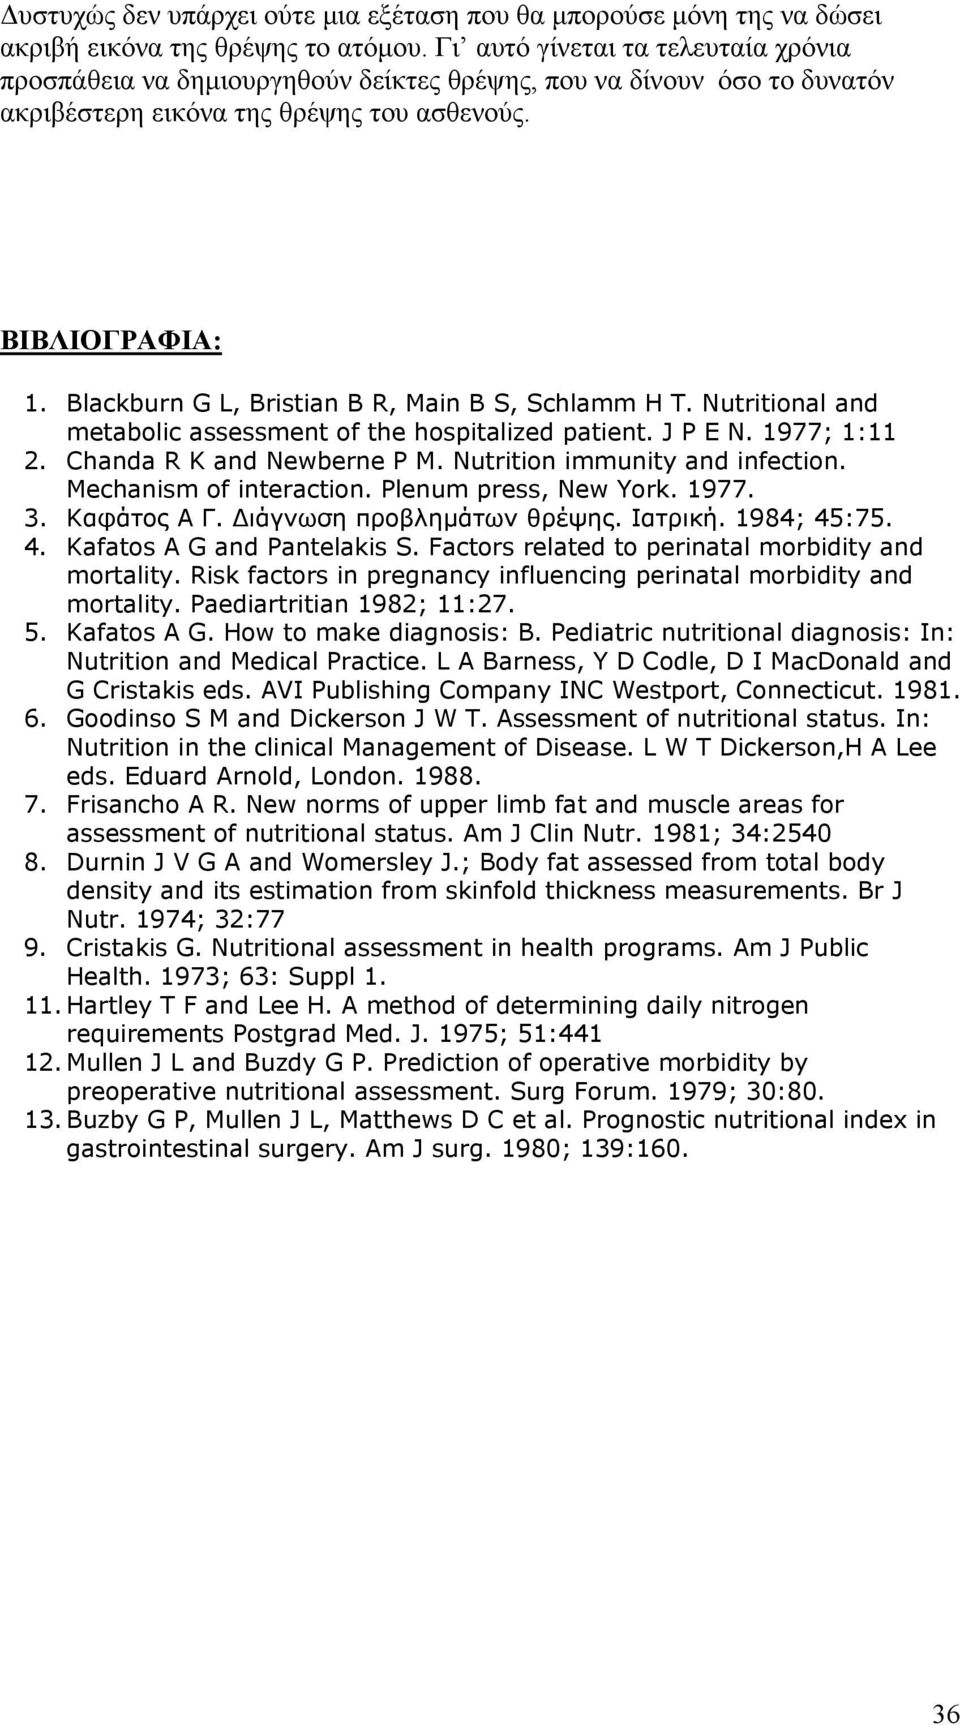 Blackburn G L, Bristian B R, Main B S, Schlamm H T. Nutritional and metabolic assessment of the hospitalized patient. J P E N. 1977; 1:11 2. Chanda R K and Newberne P M.